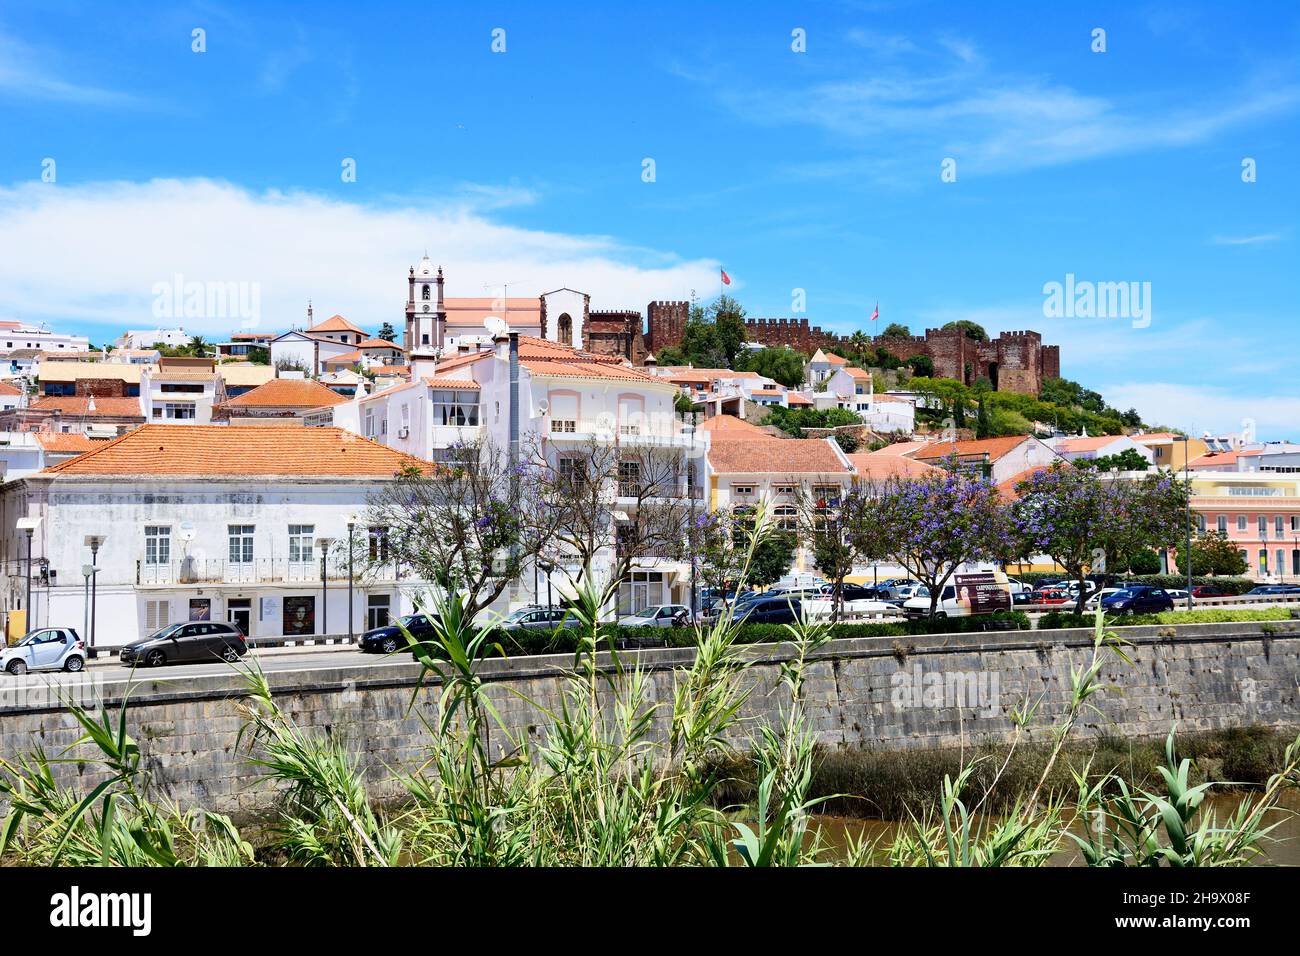 View of the town with the castle and cathedral to the rear and jacaranda trees in bloom in the foreground, Silves, Portugal, Europe. Stock Photo